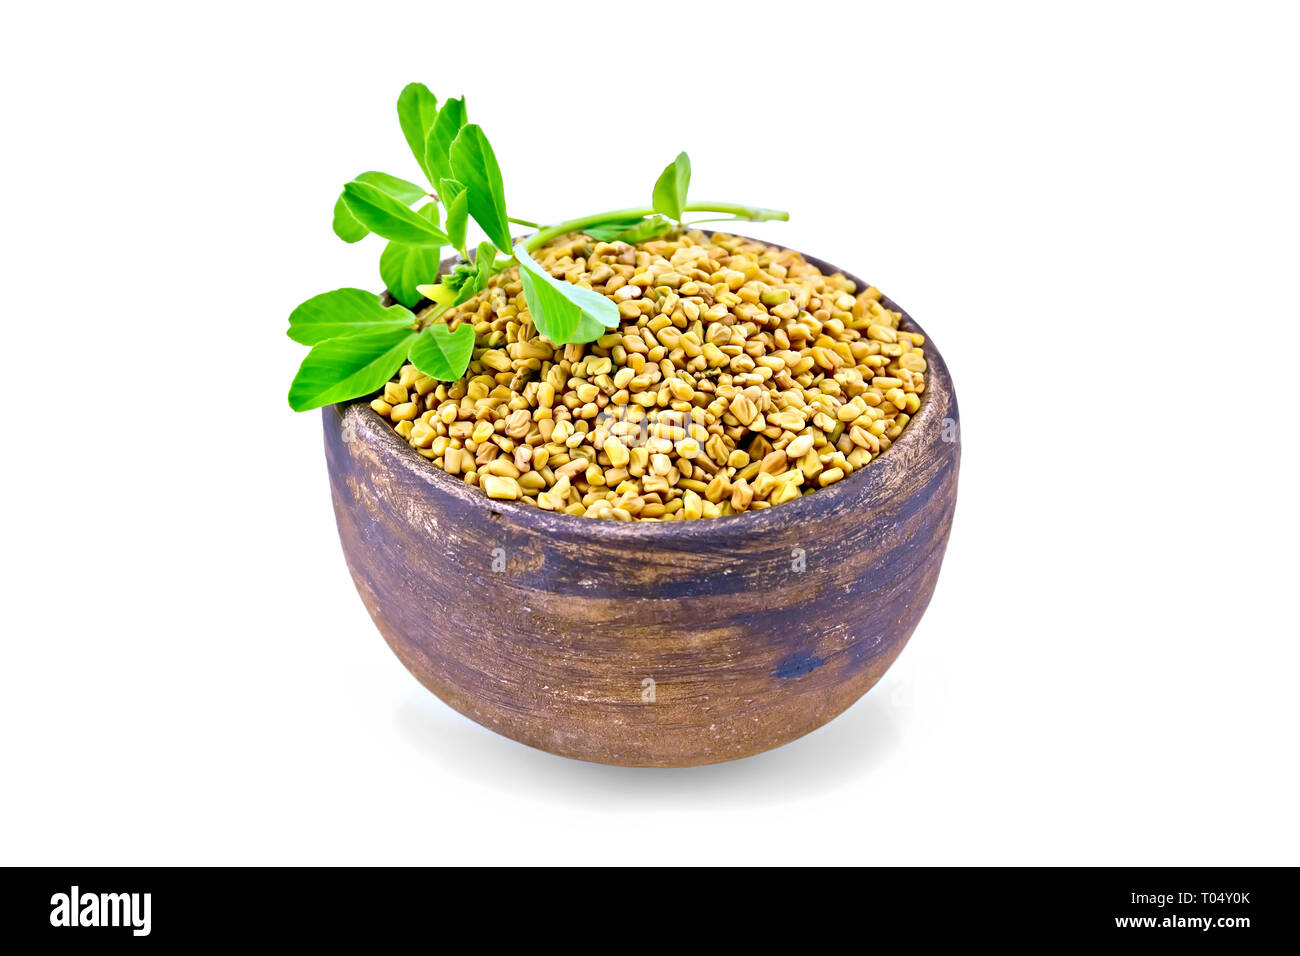 Fenugreek seeds in a clay bowl with green leaves isolated on white background Stock Photo